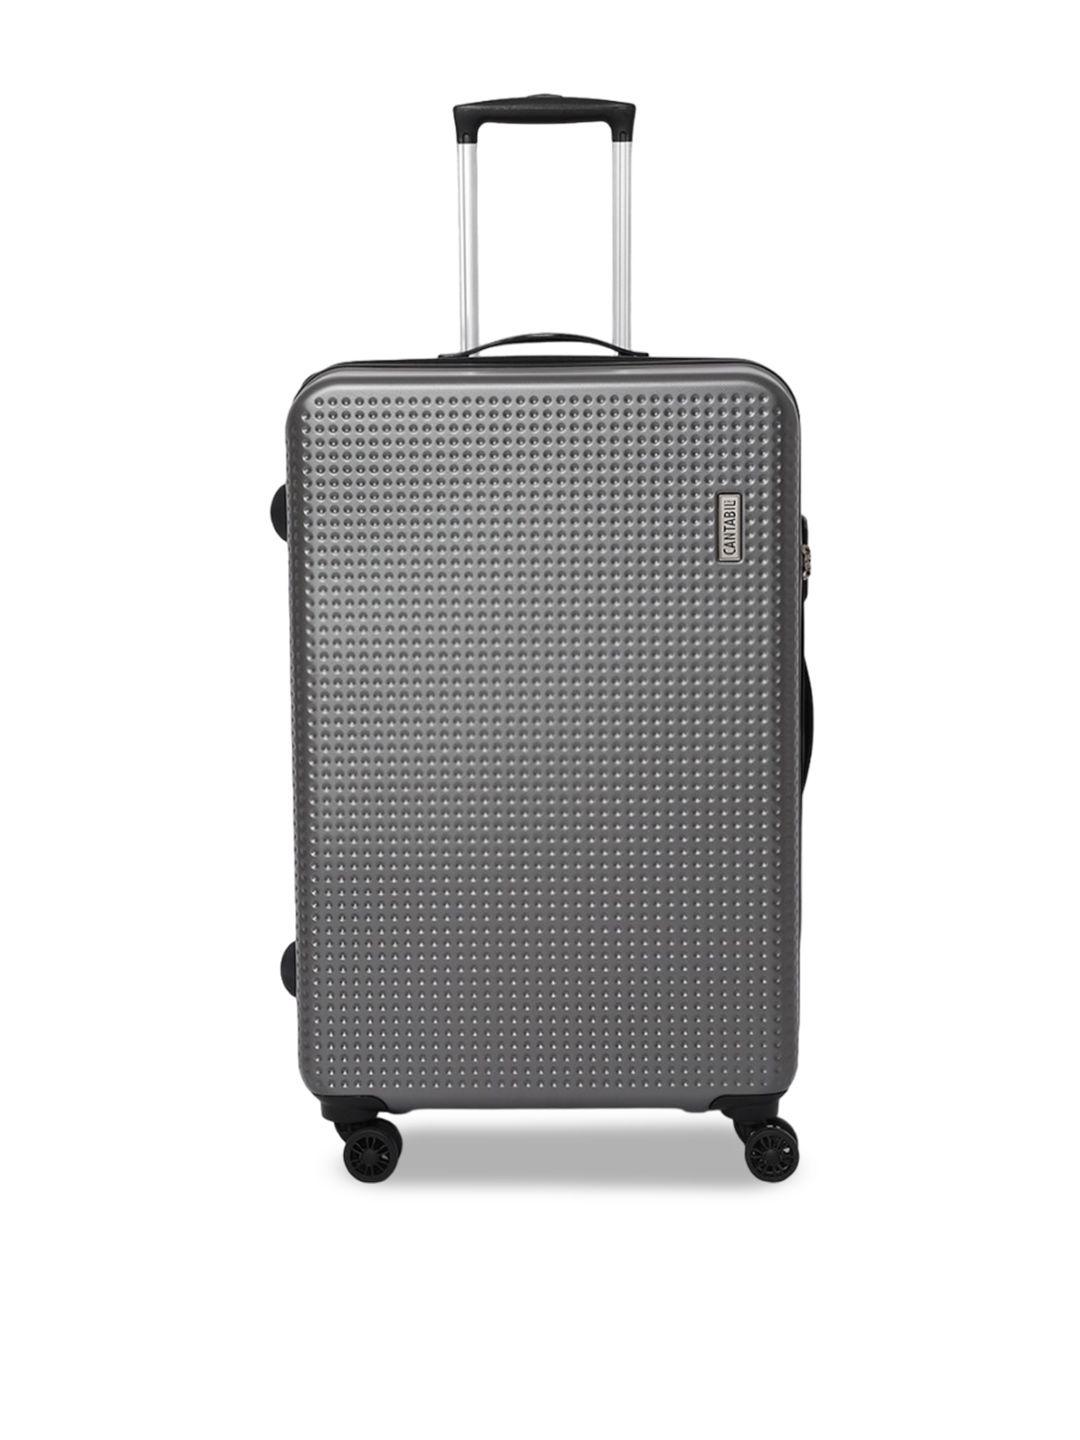 cantabil textured hard-sided cabin trolley suitcase